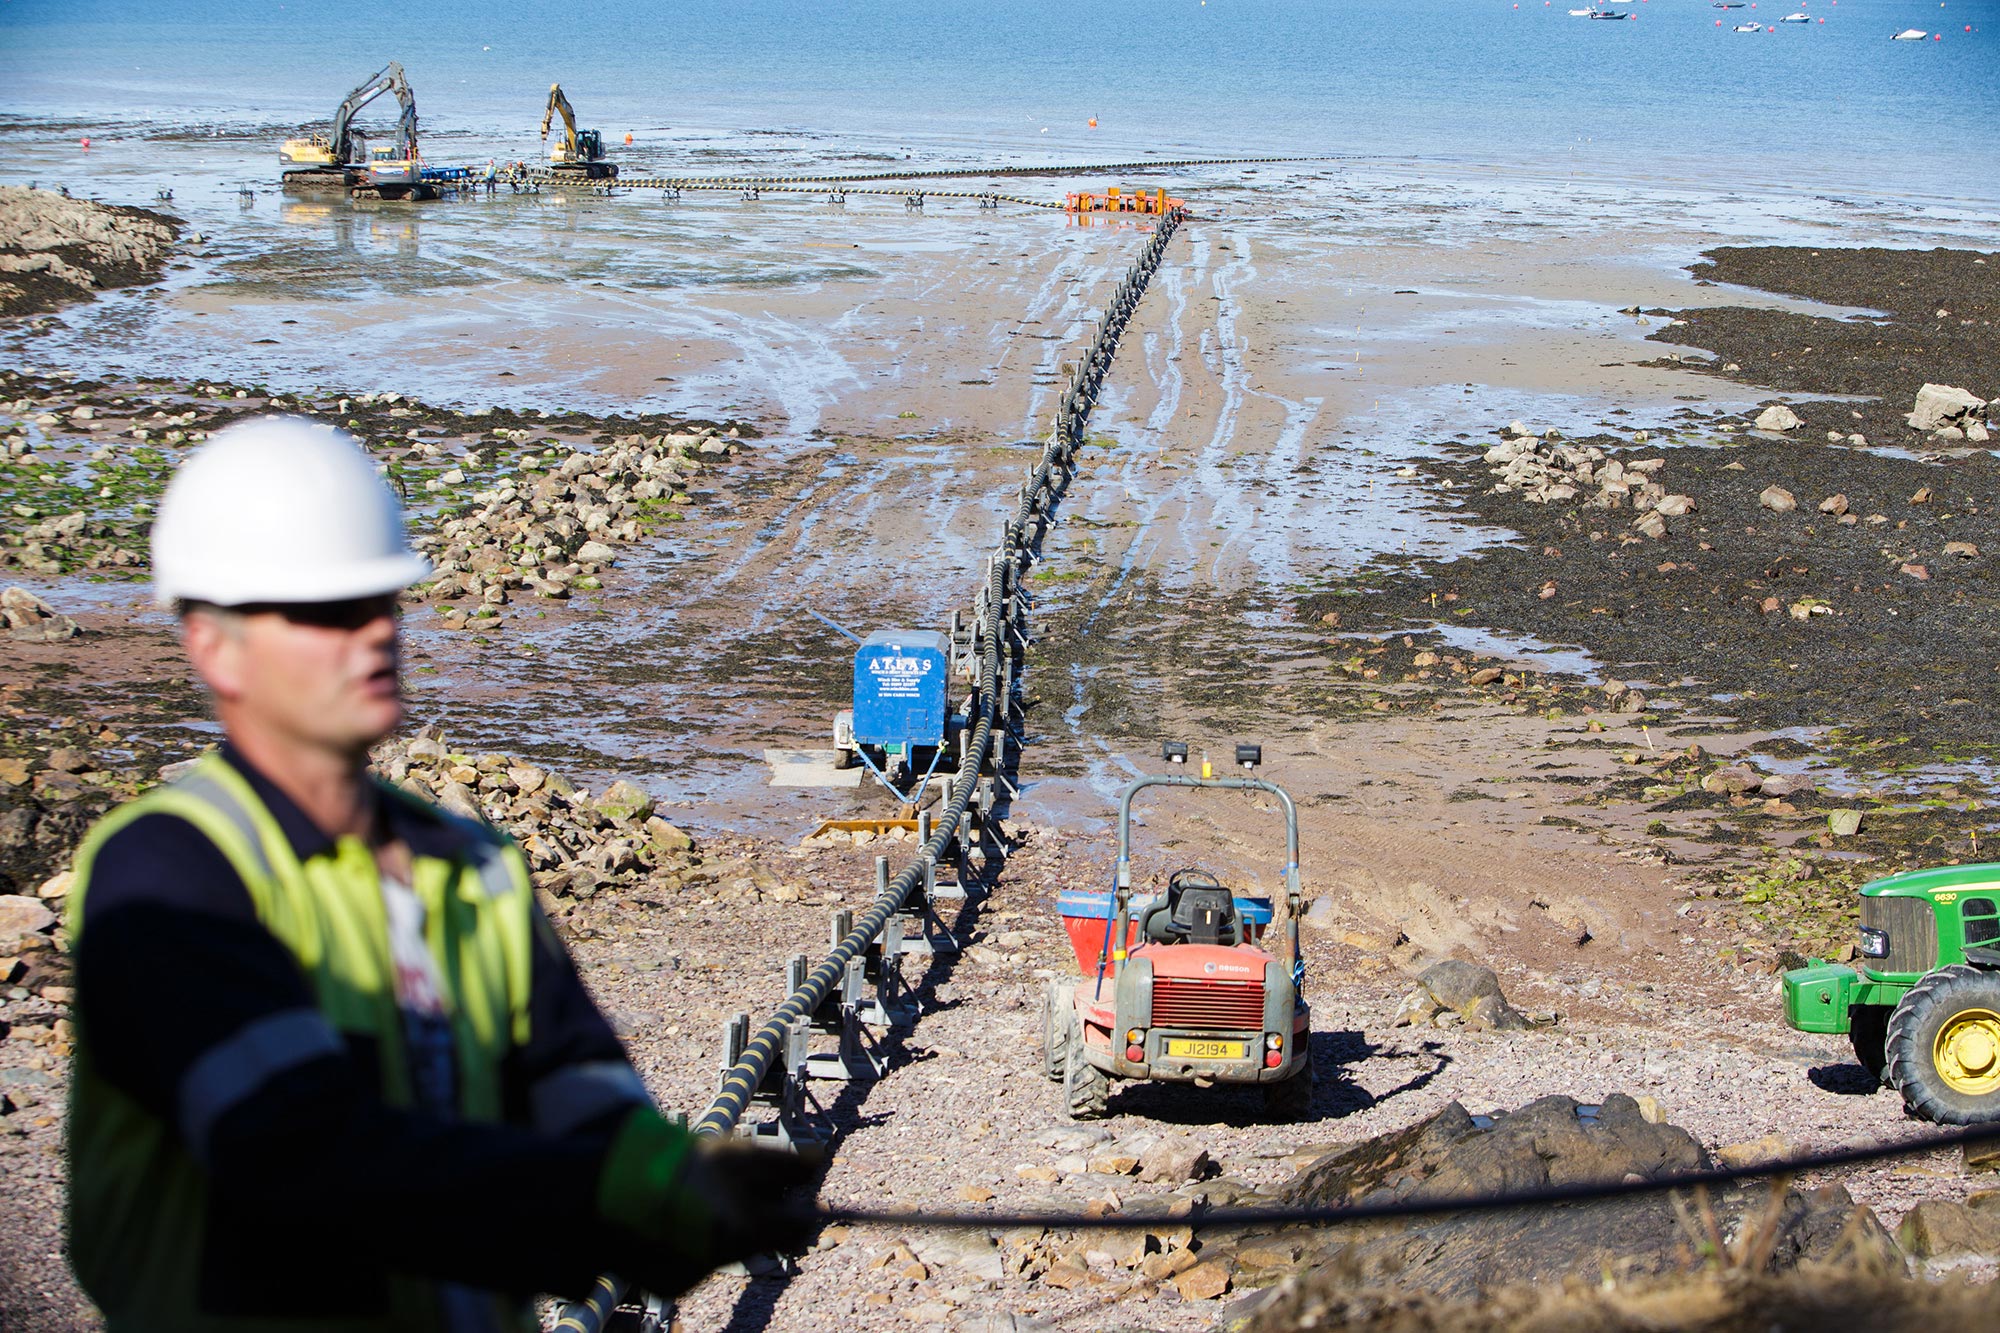 Normandie 1, a subsea electric cable is laid out across a beach ready to be buried.